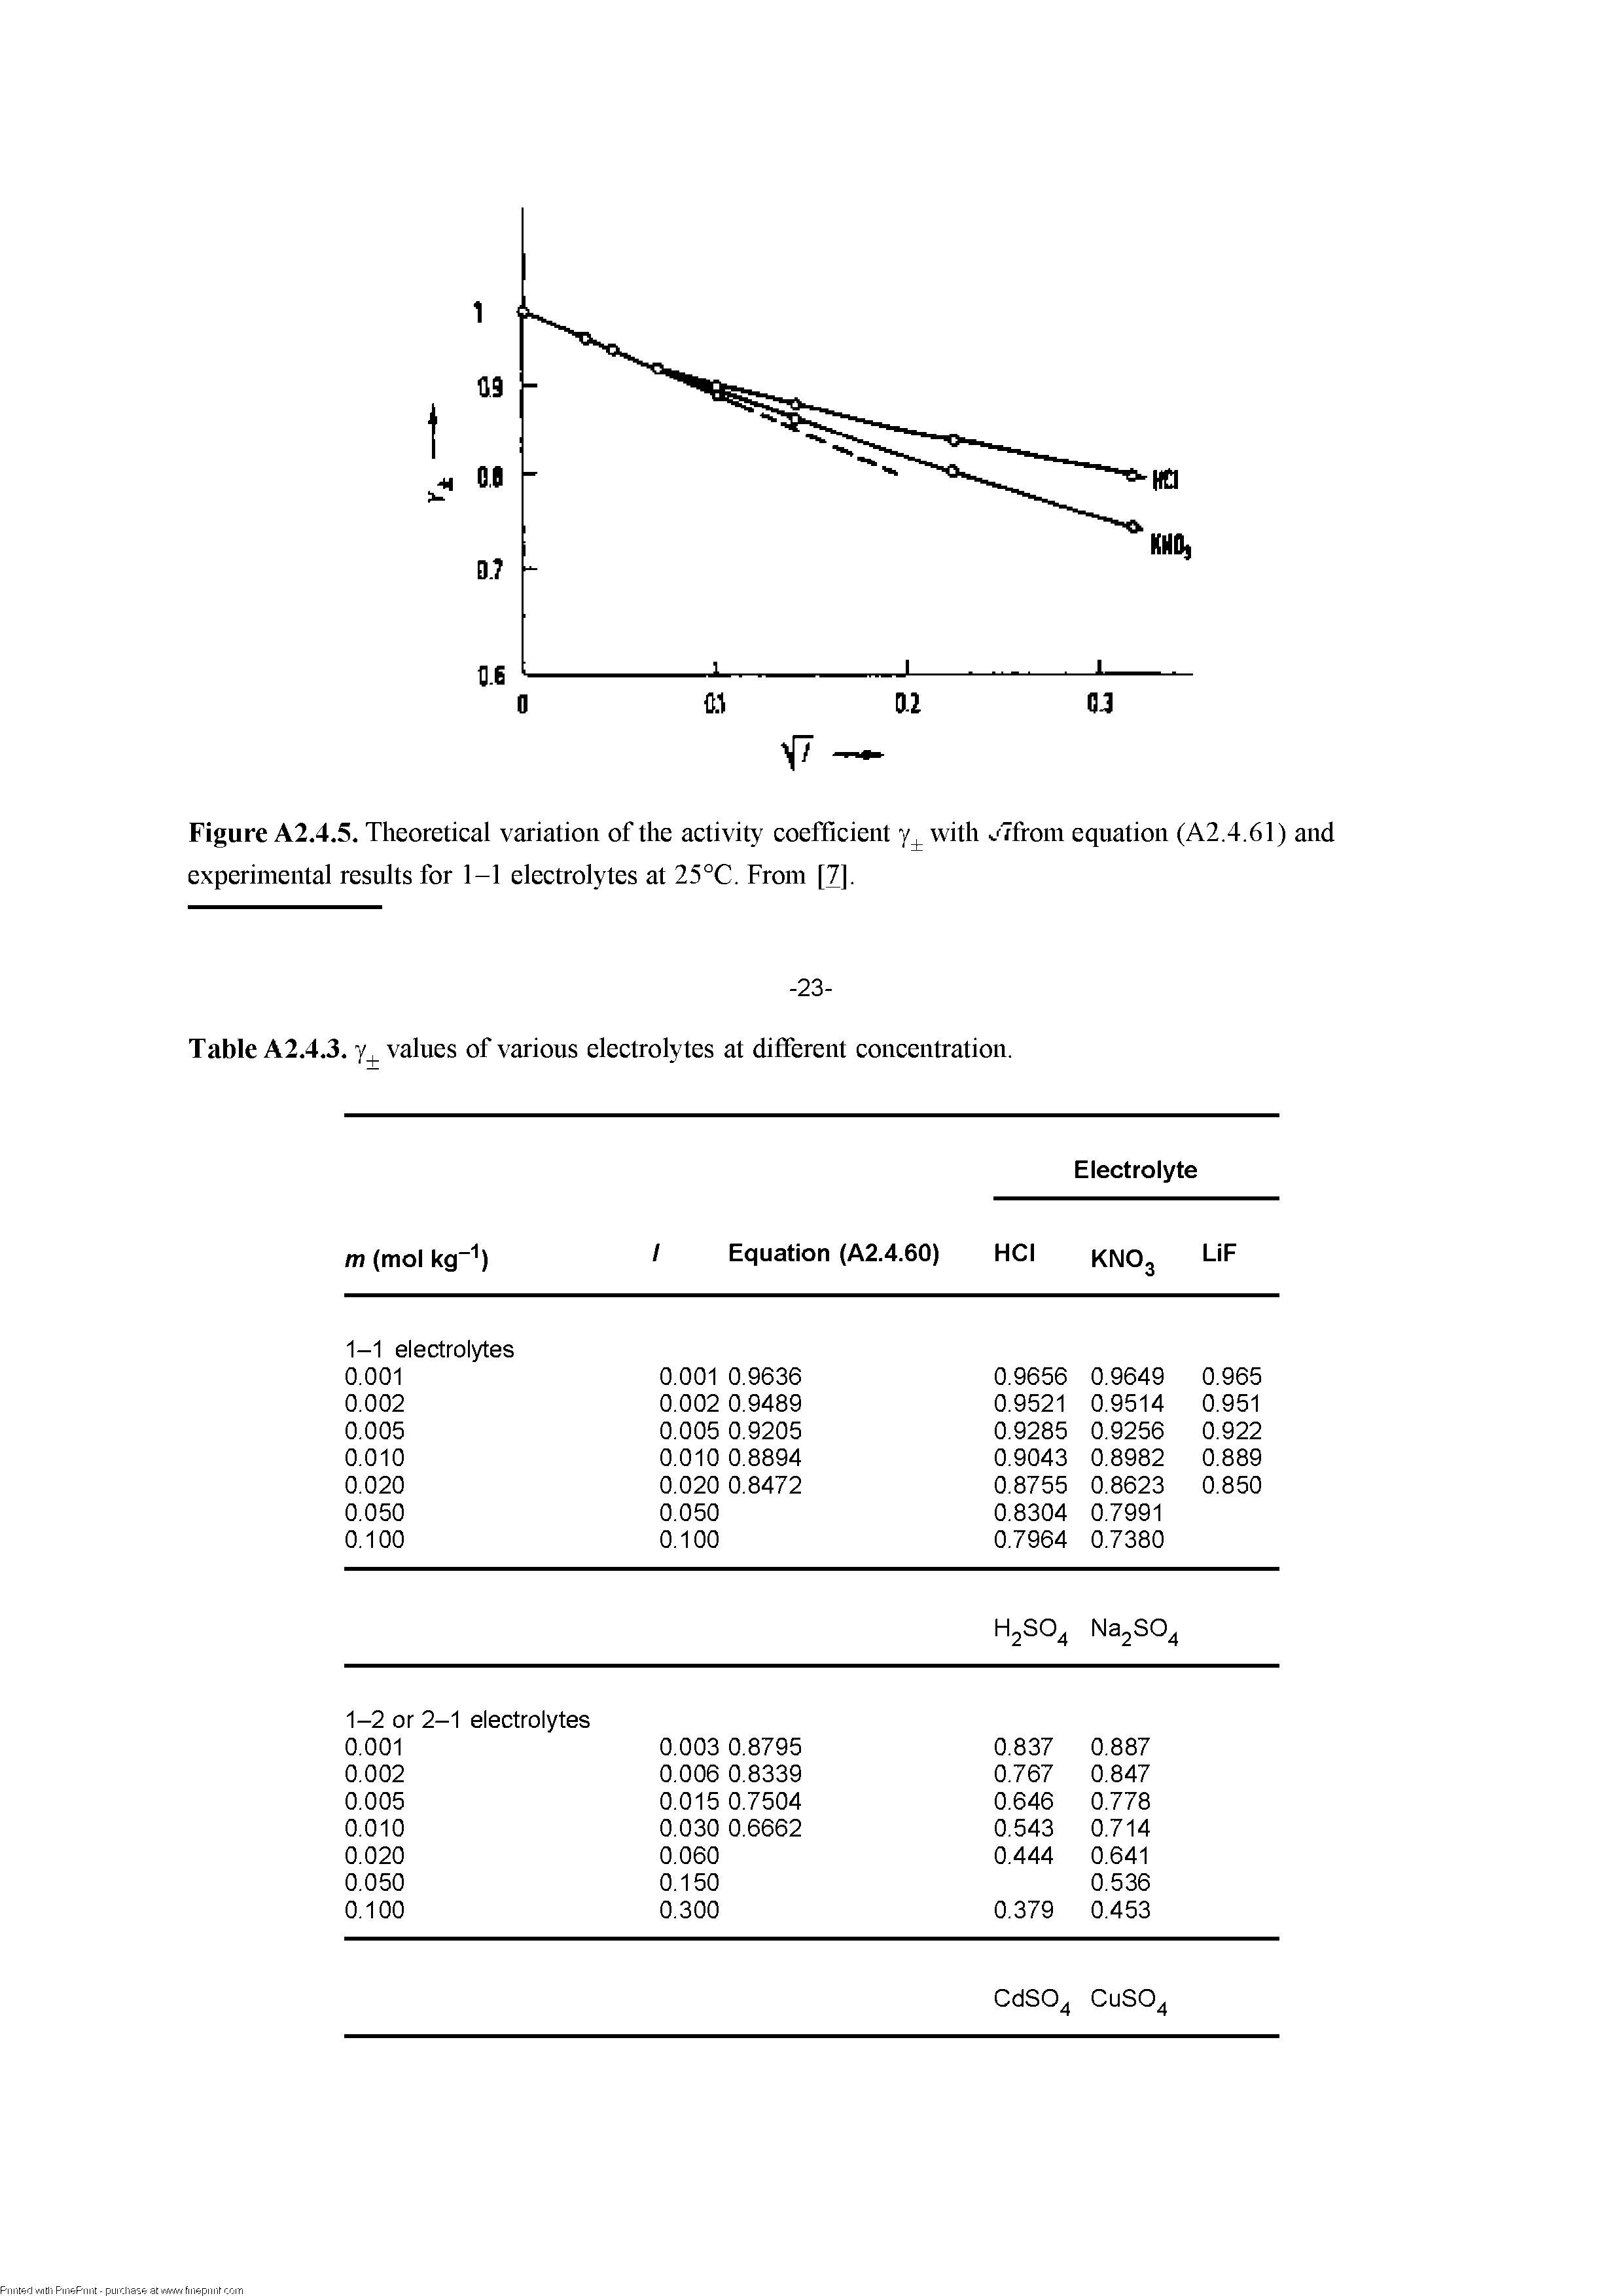 Figure A2.4.5. Theoretical variation of the activity coefficient with Tfroin equation (A2.4.61) and experimental results for 1-1 electrolytes at 25°C. From [7],...